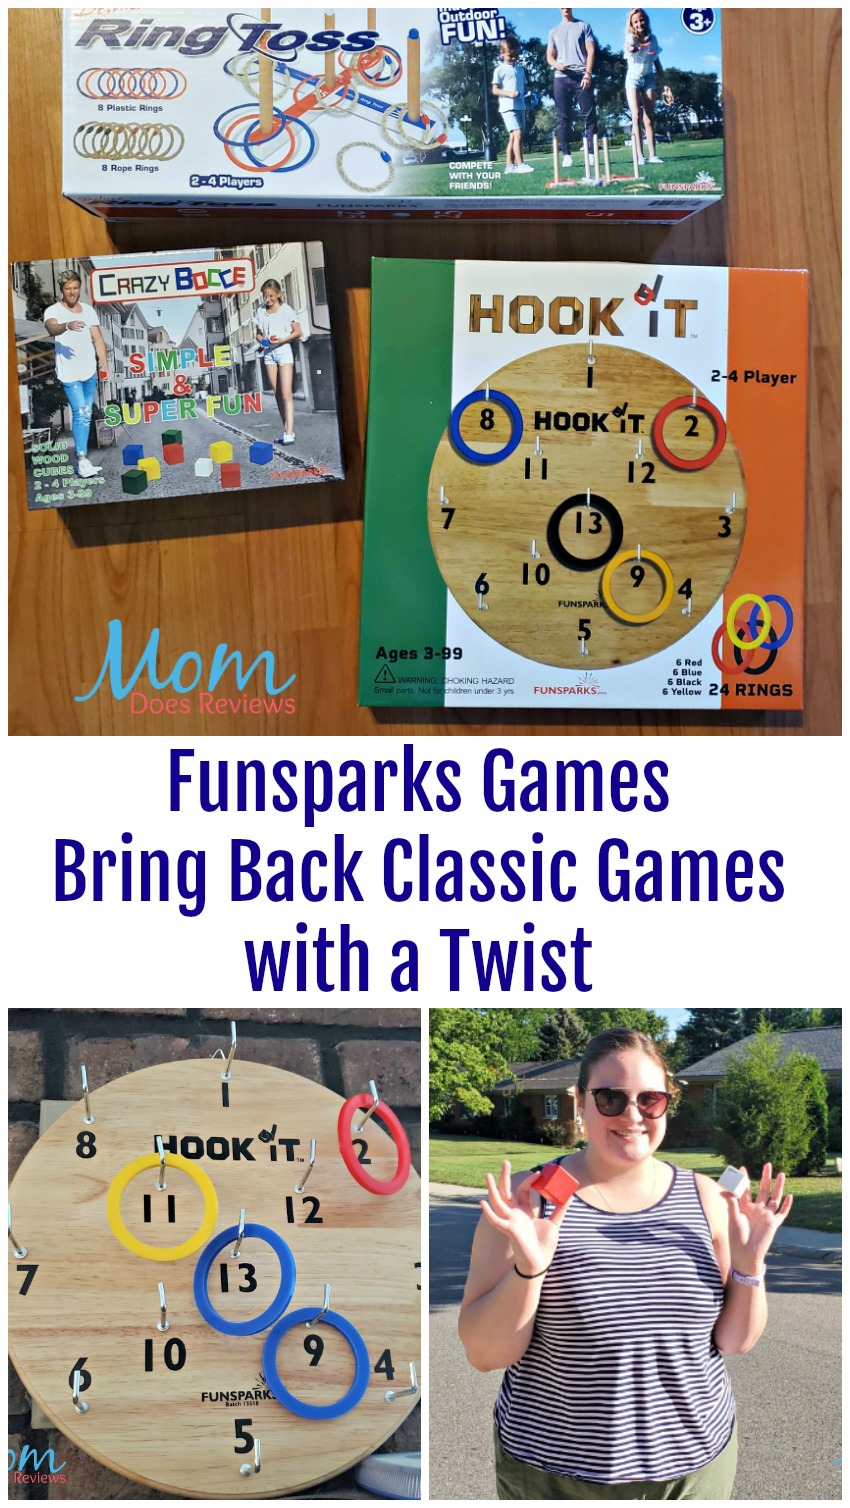 Funsparks Games Bring Back Classic Games with a Twist